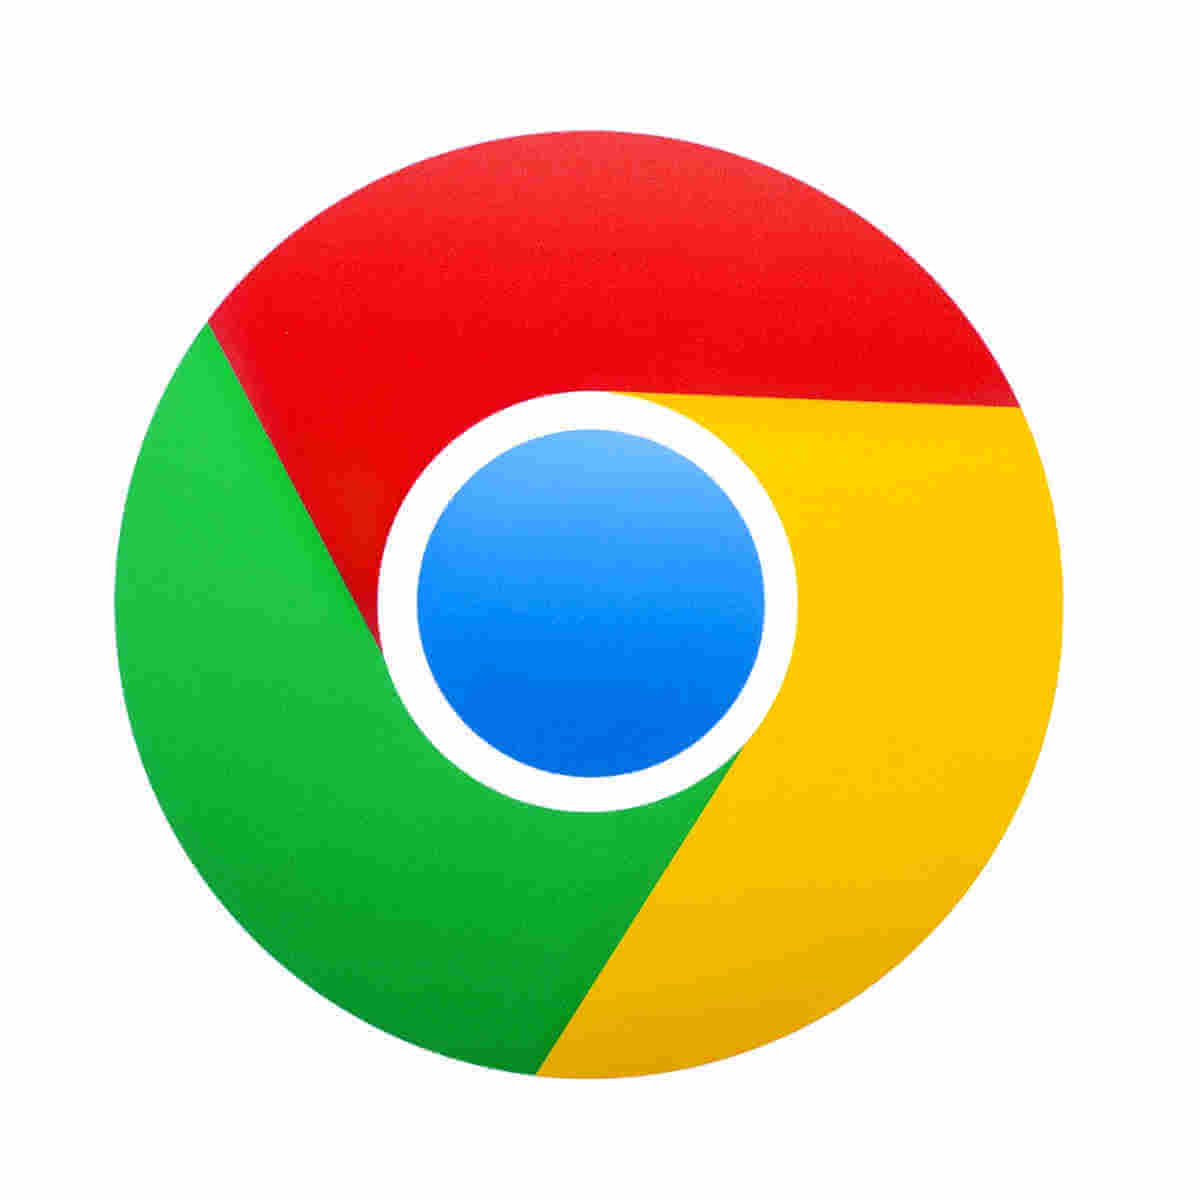 Chrome to use less RAM in Windows 10